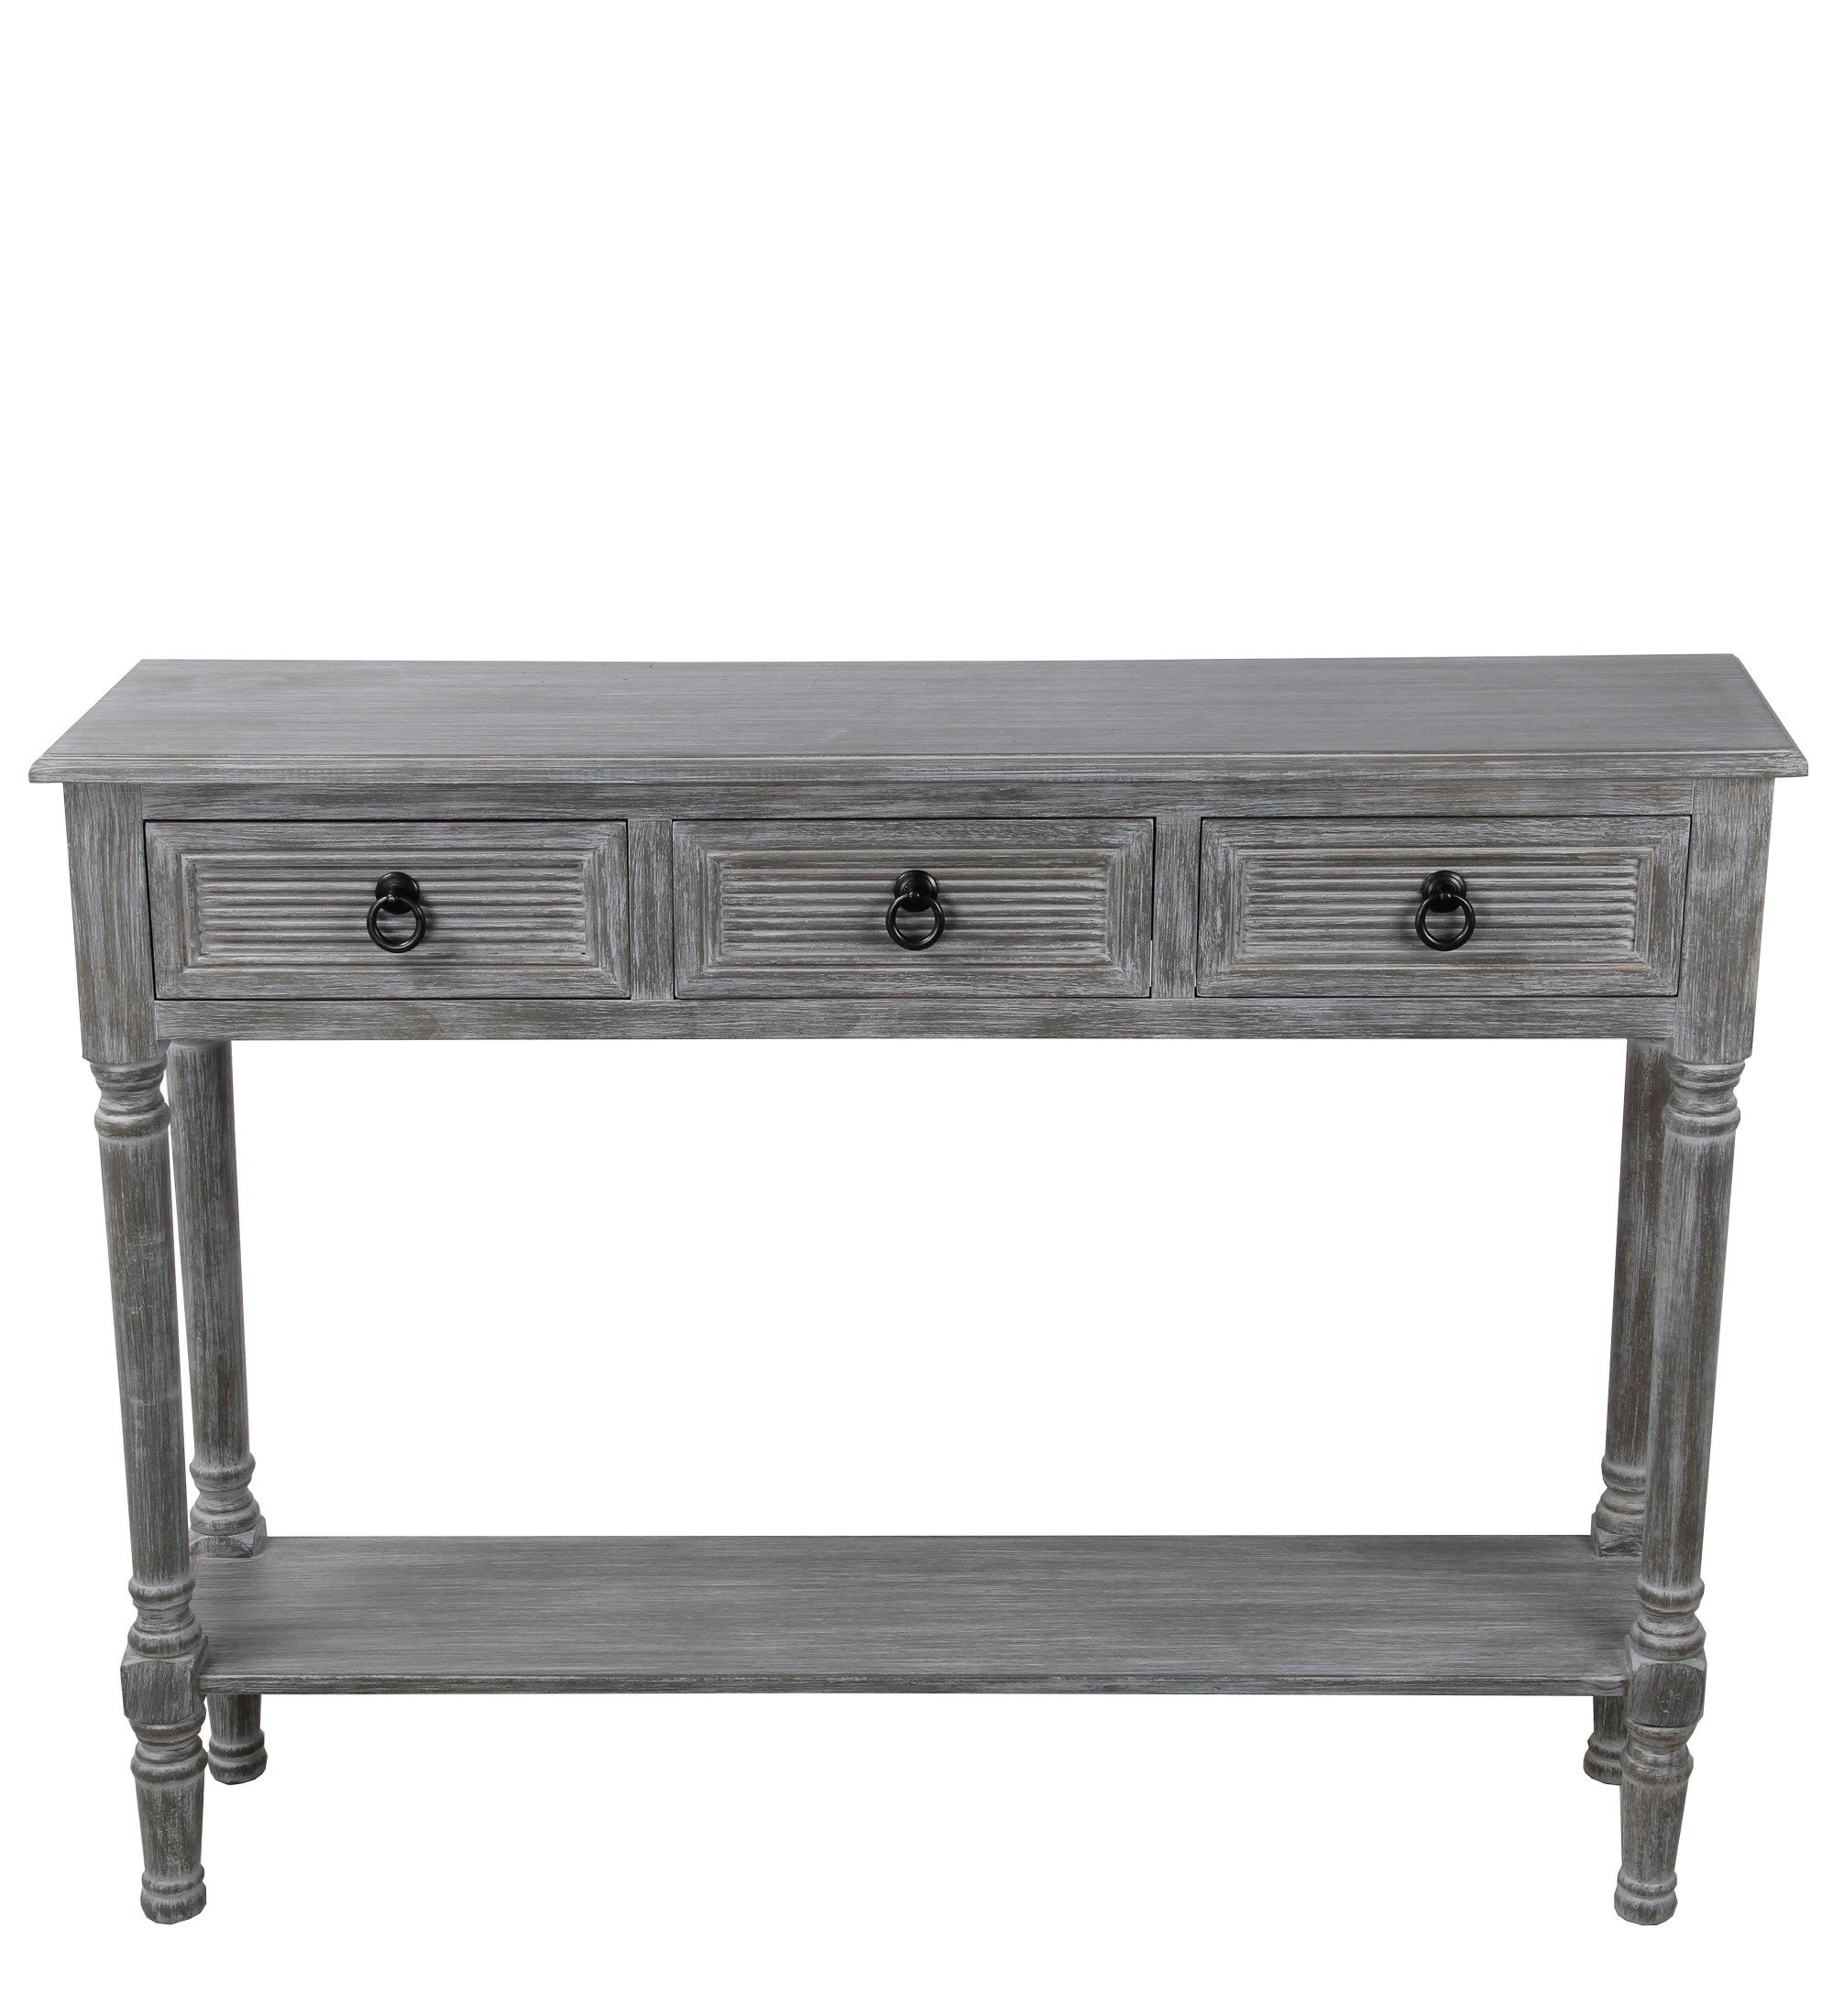 Slate Grey 3 Drawer Console Table – Walmart – Walmart For Gray Wood Veneer Console Tables (View 15 of 20)